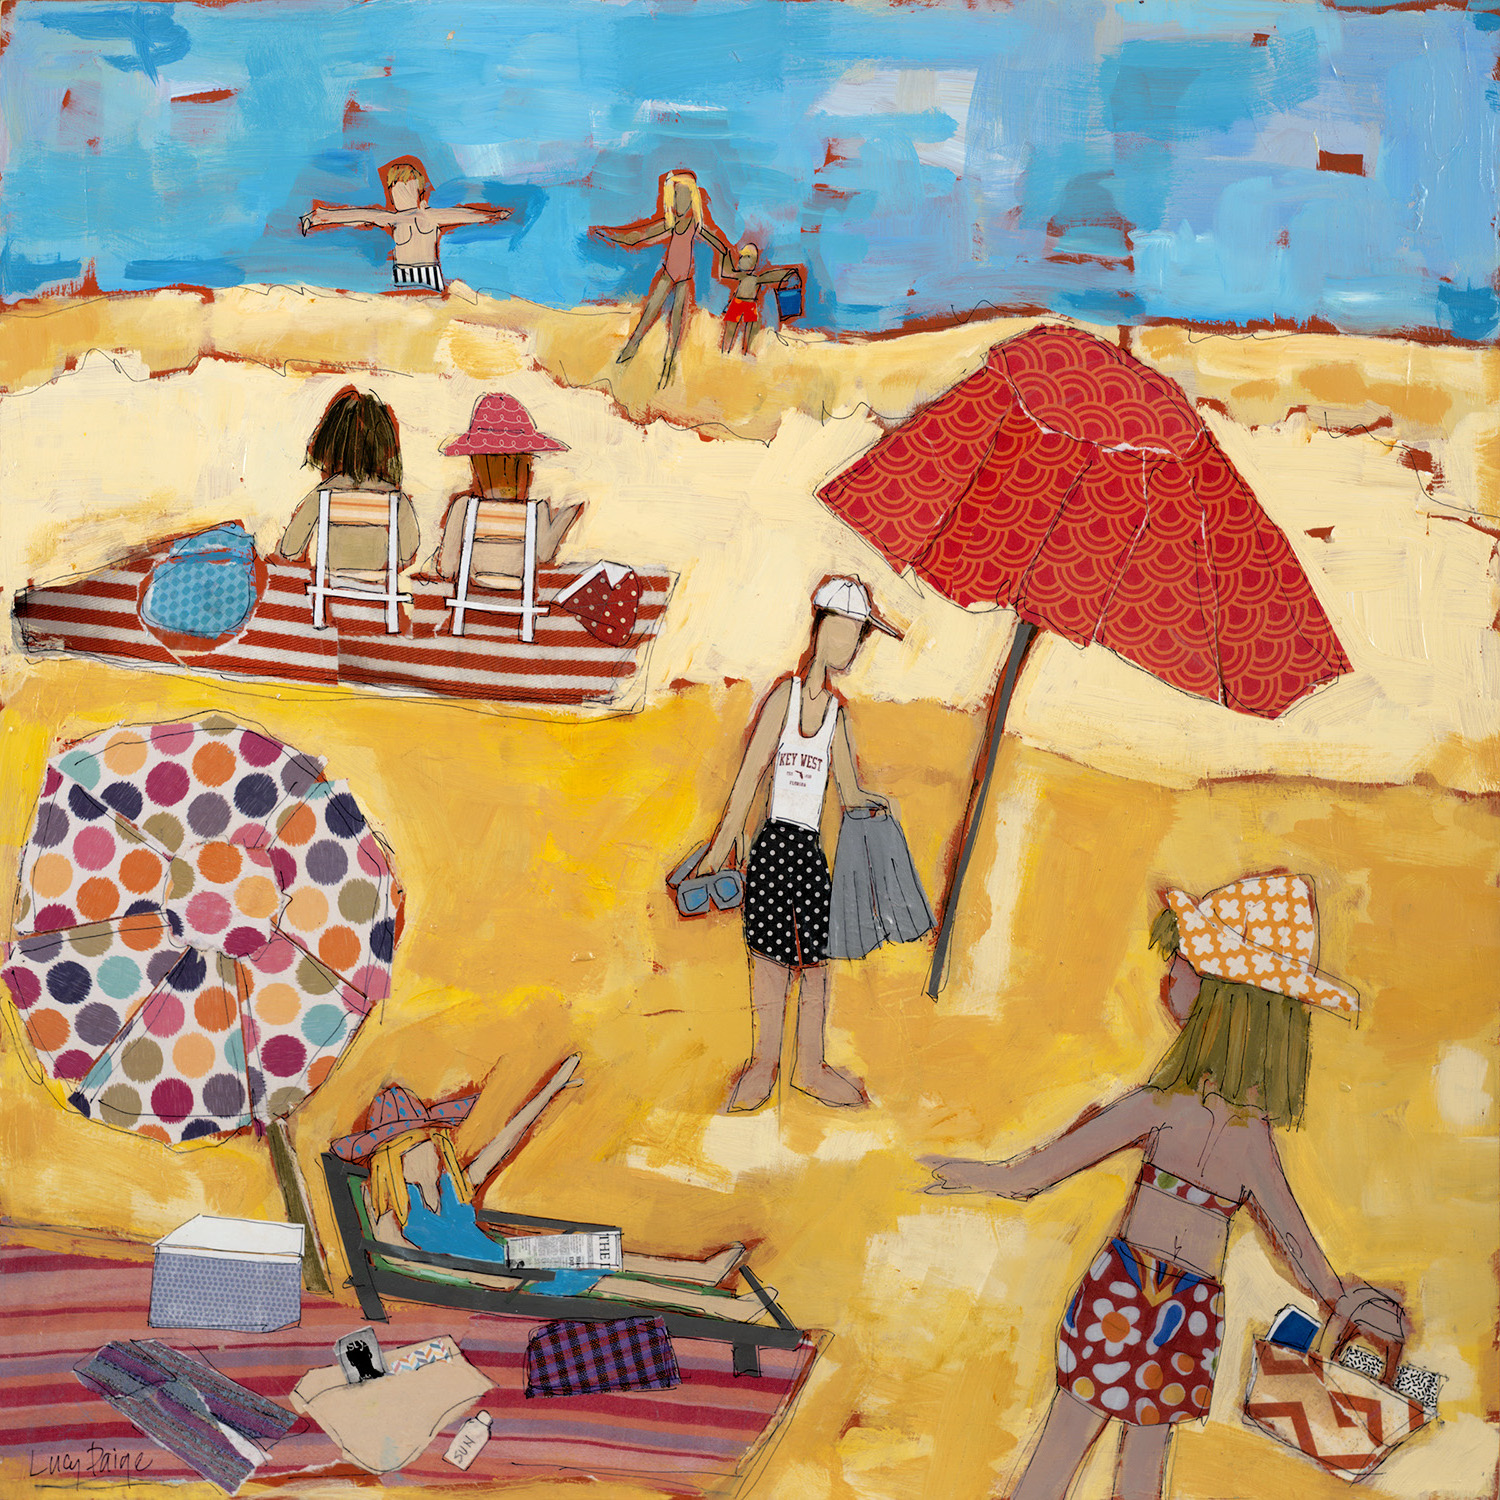 lucy paige artist key west beach day series collage Meet Me At The Beach .jpg